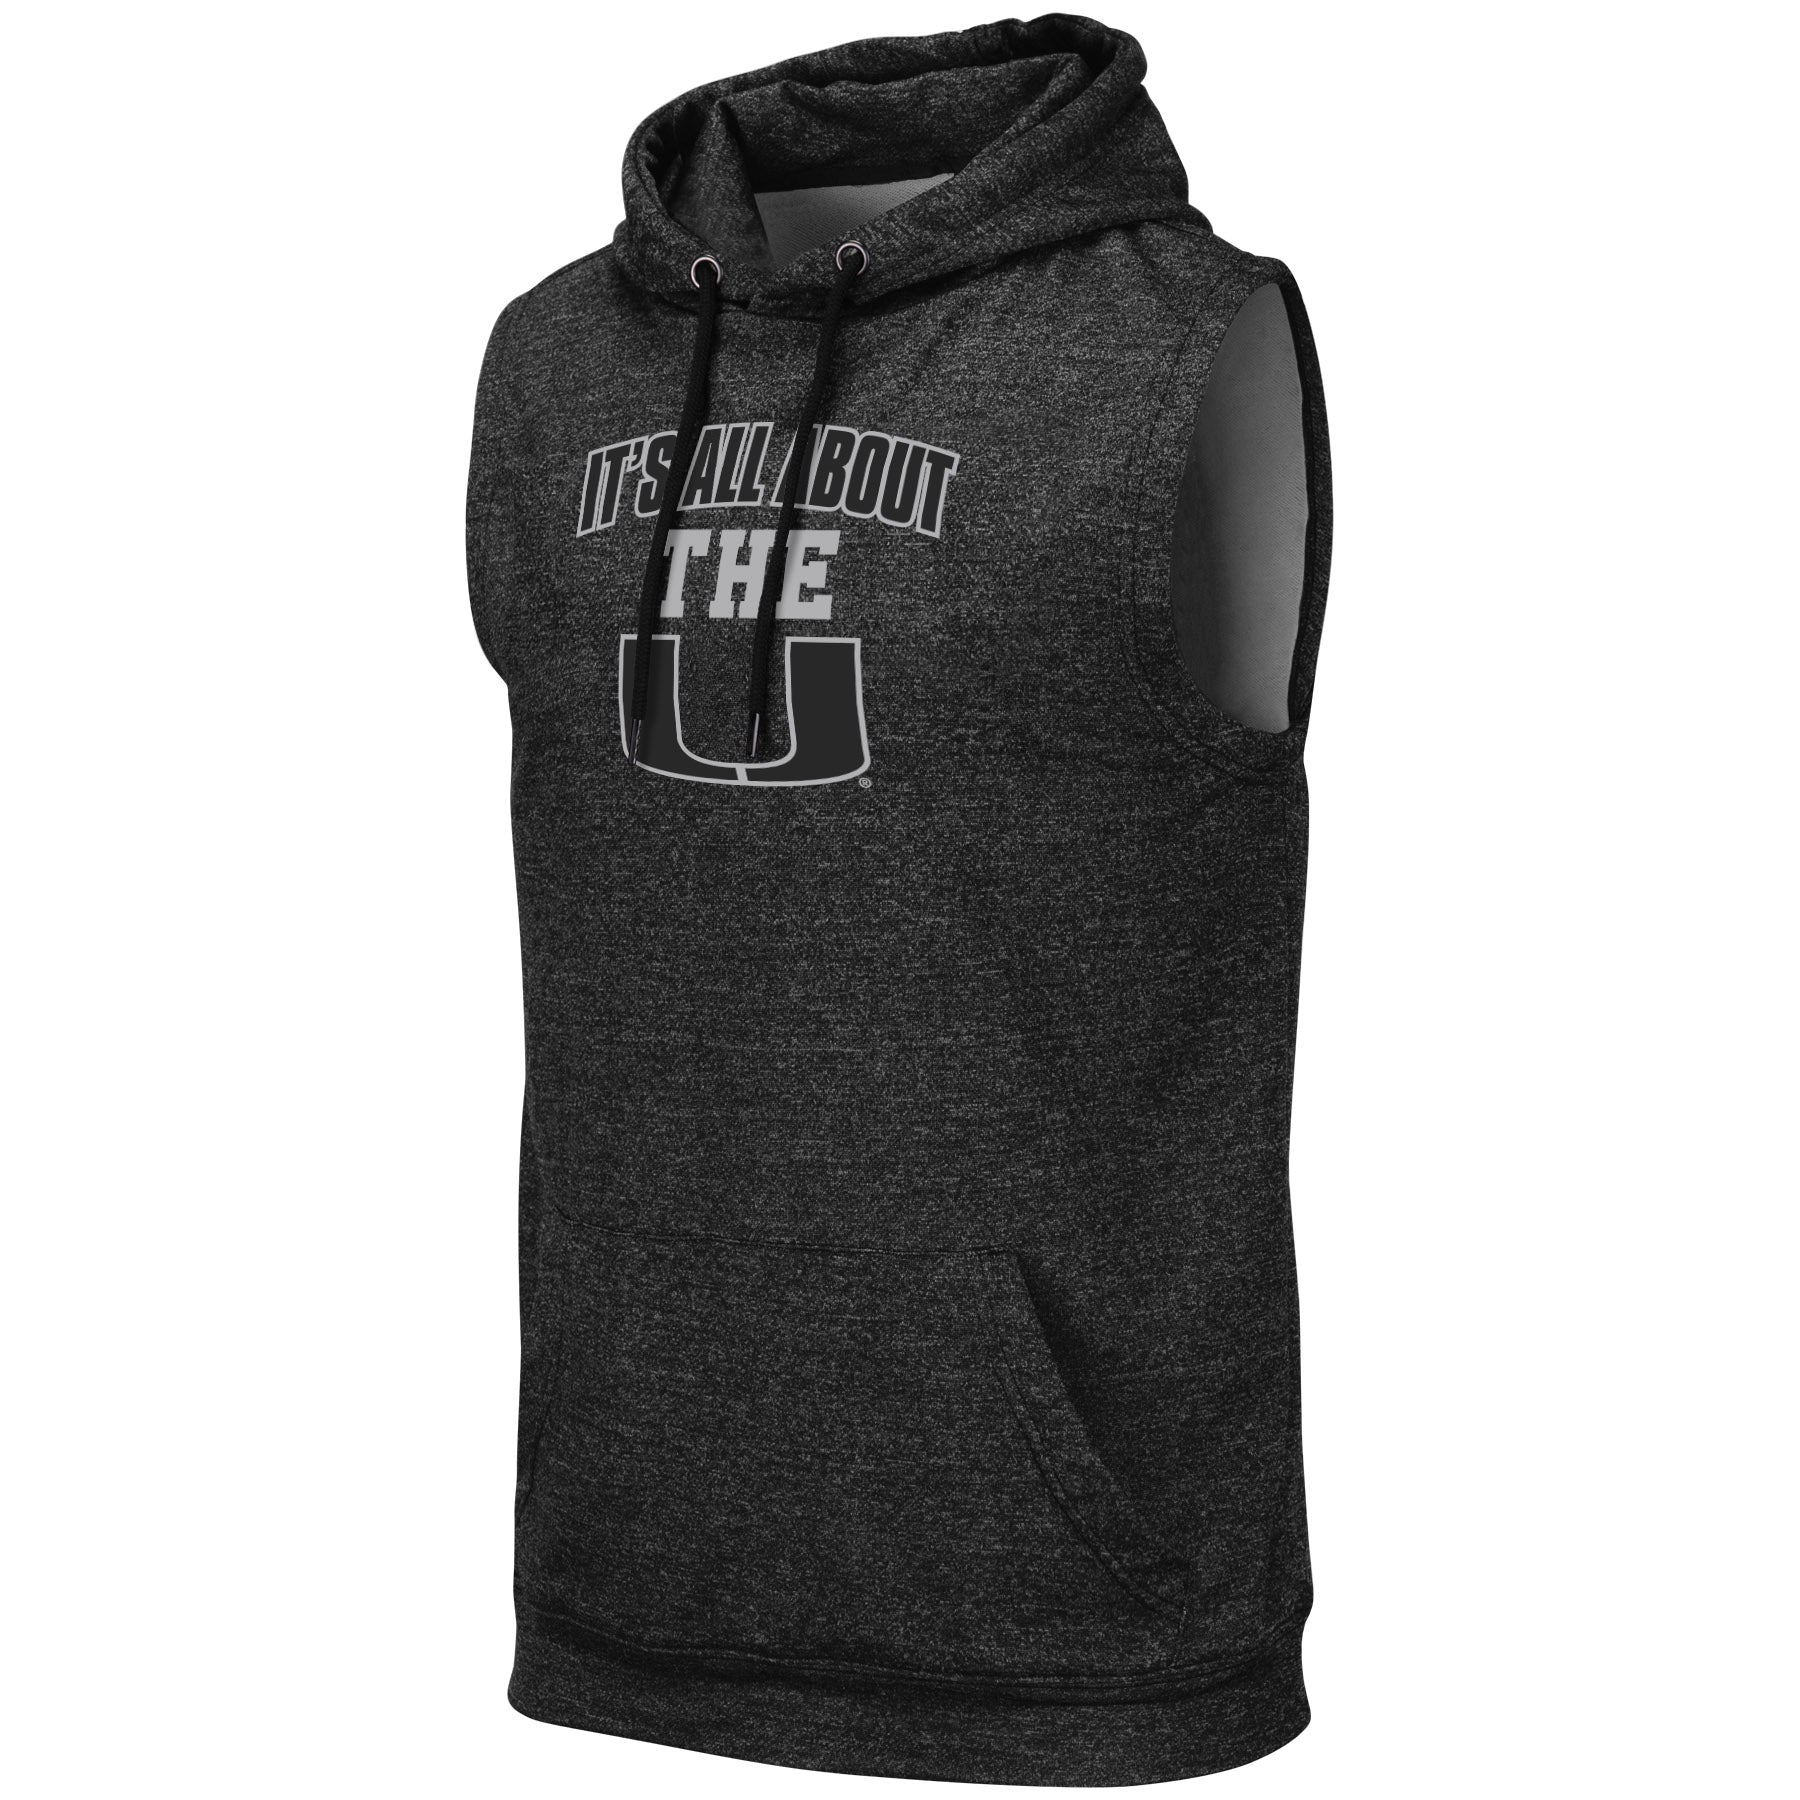 Miami Hurricanes Colosseum Men's Sleeveless Hoodie- It's All About The U - Charcoal/Black